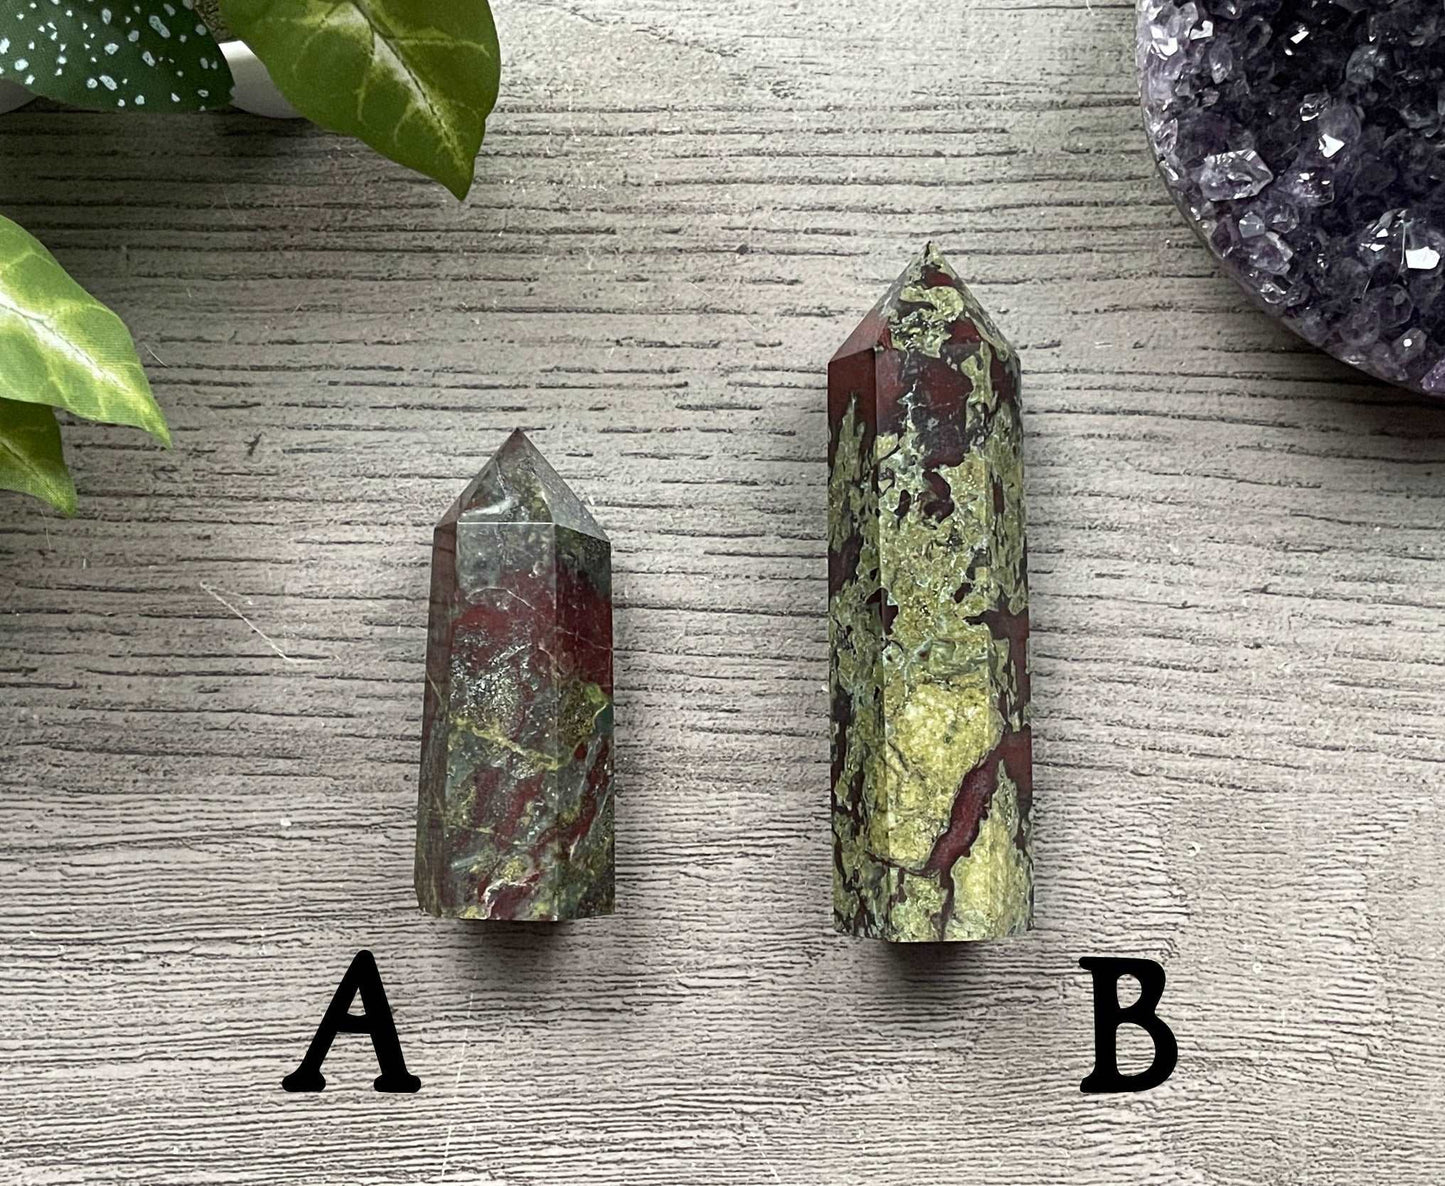 Pictured are various points of dragon bloodstone jasper.